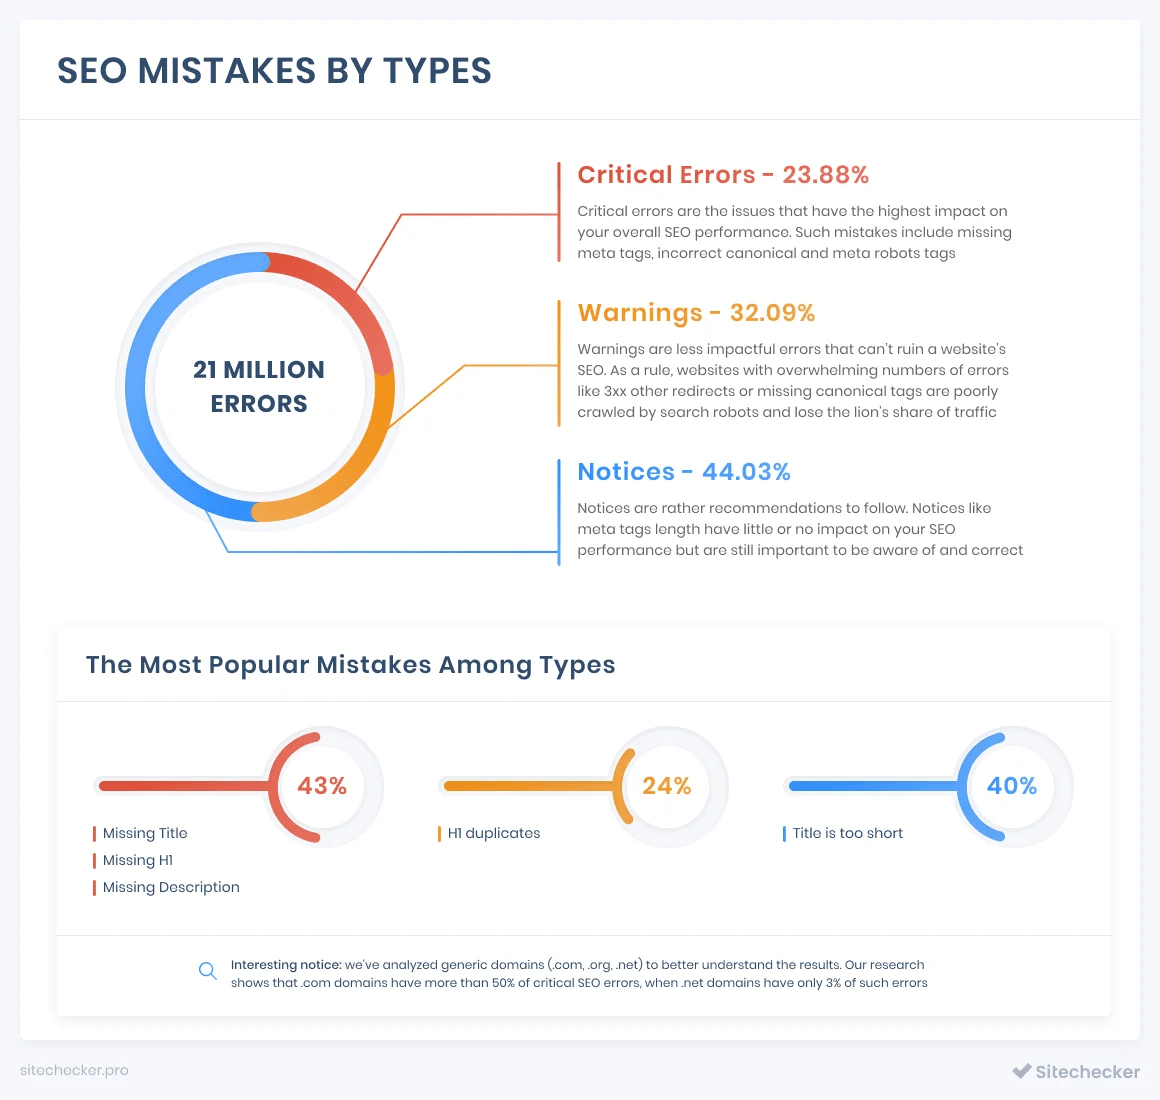 seo mistakes by types